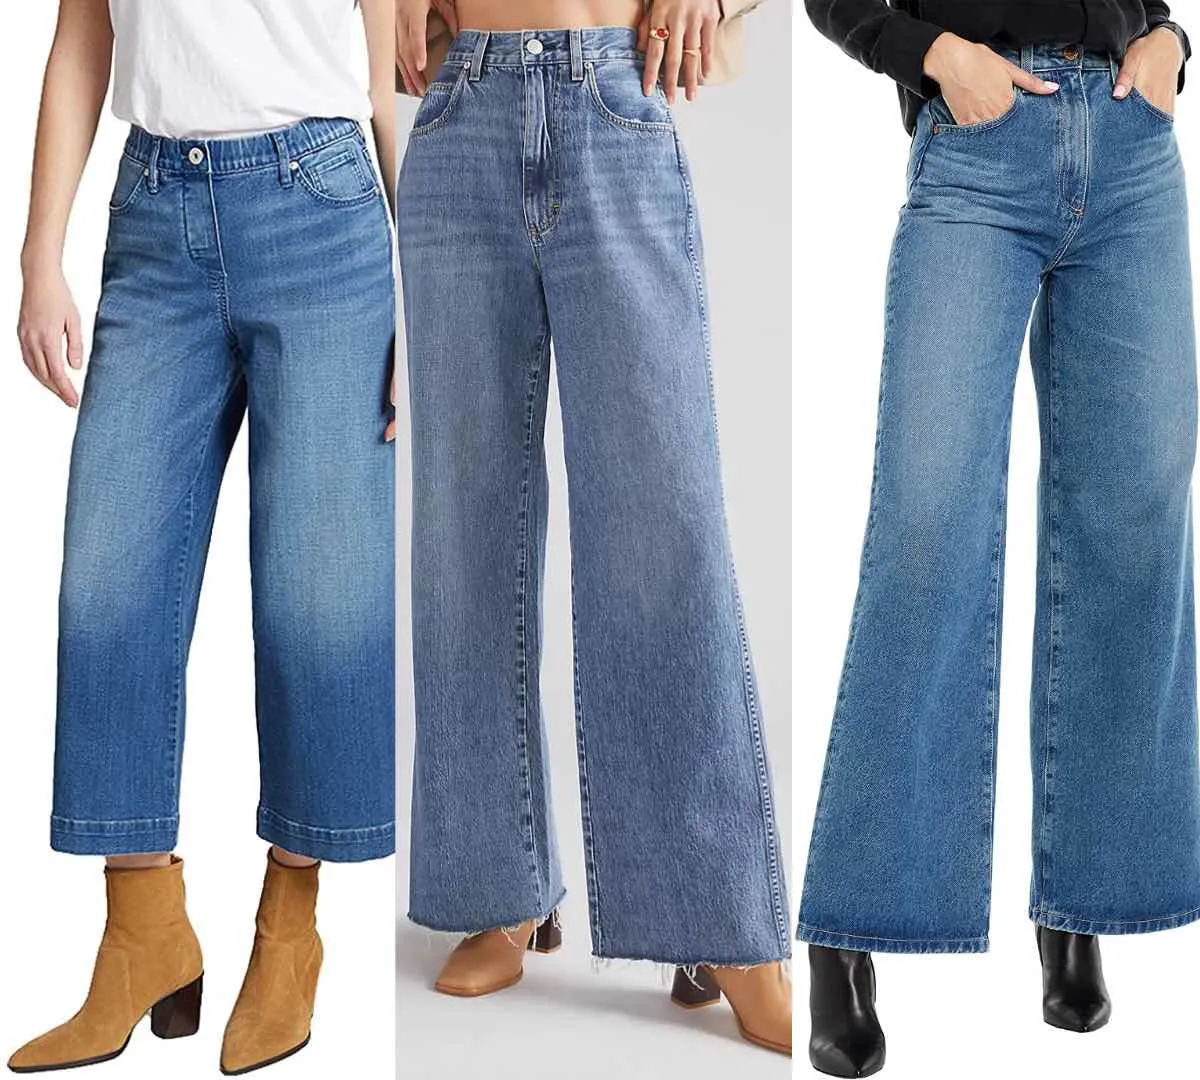 3 women wearing different wide leg jeans with boots.